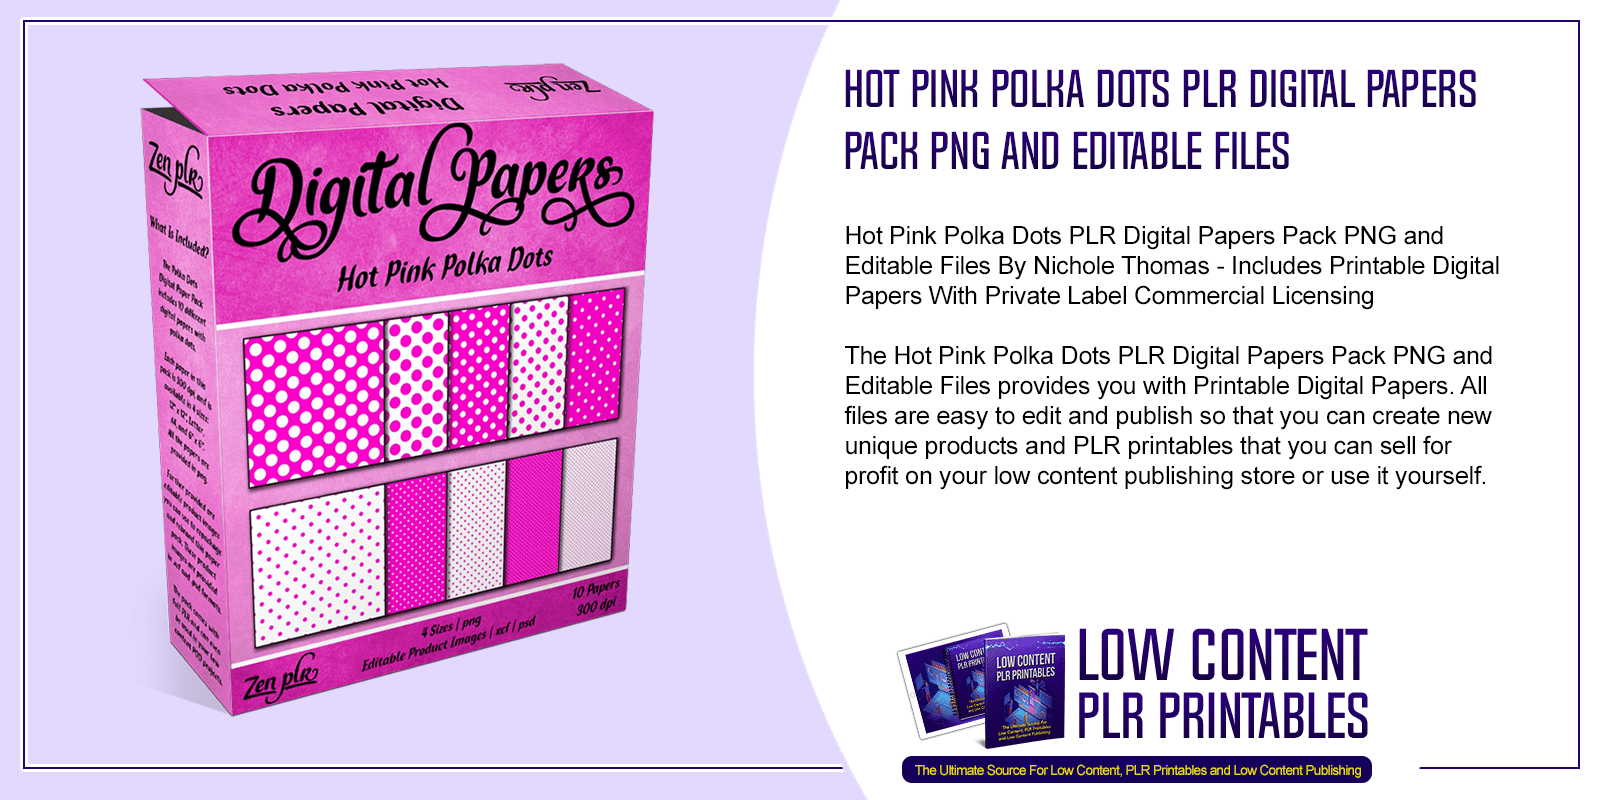 Hot Pink Polka Dots PLR Digital Papers Pack PNG and Editable Files